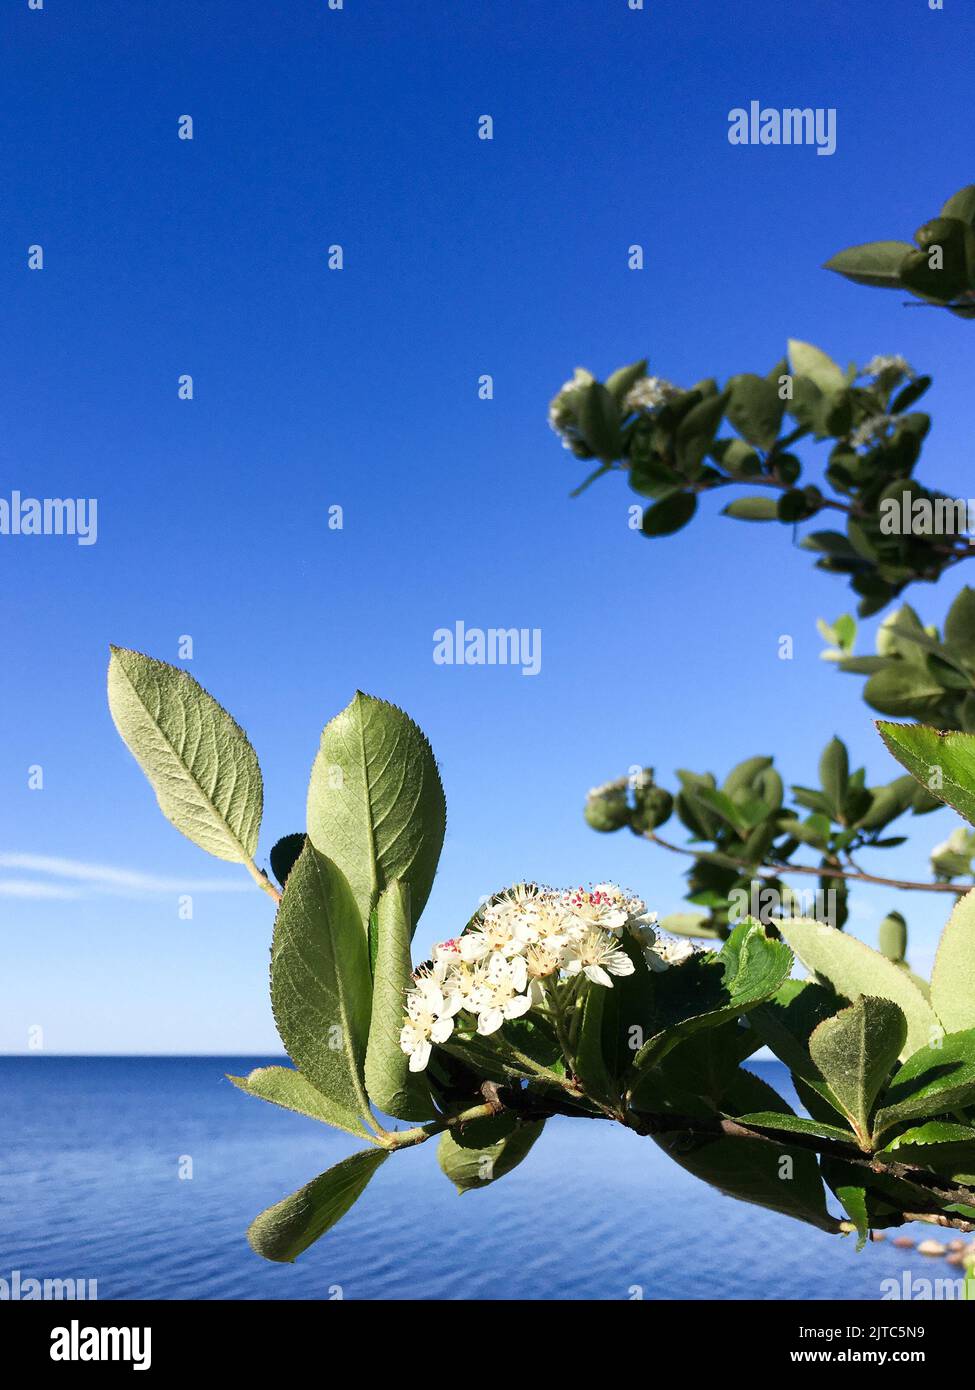 Blooming aronia tree in front of sea and blue sky. Stock Photo